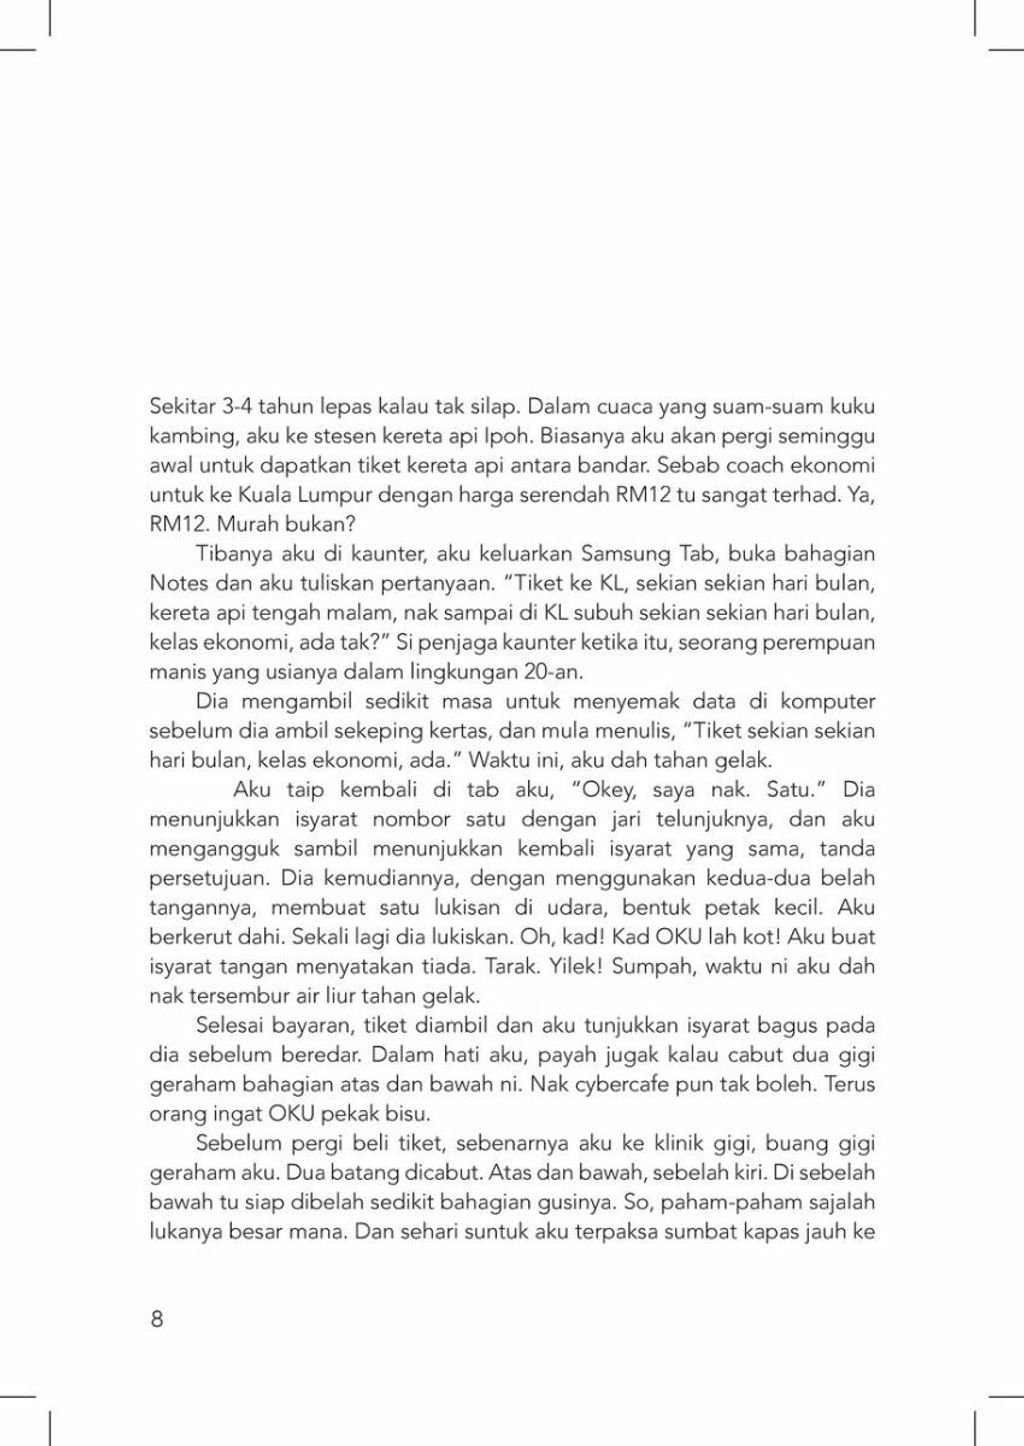 pegkung_alung_text_page_1.jpg